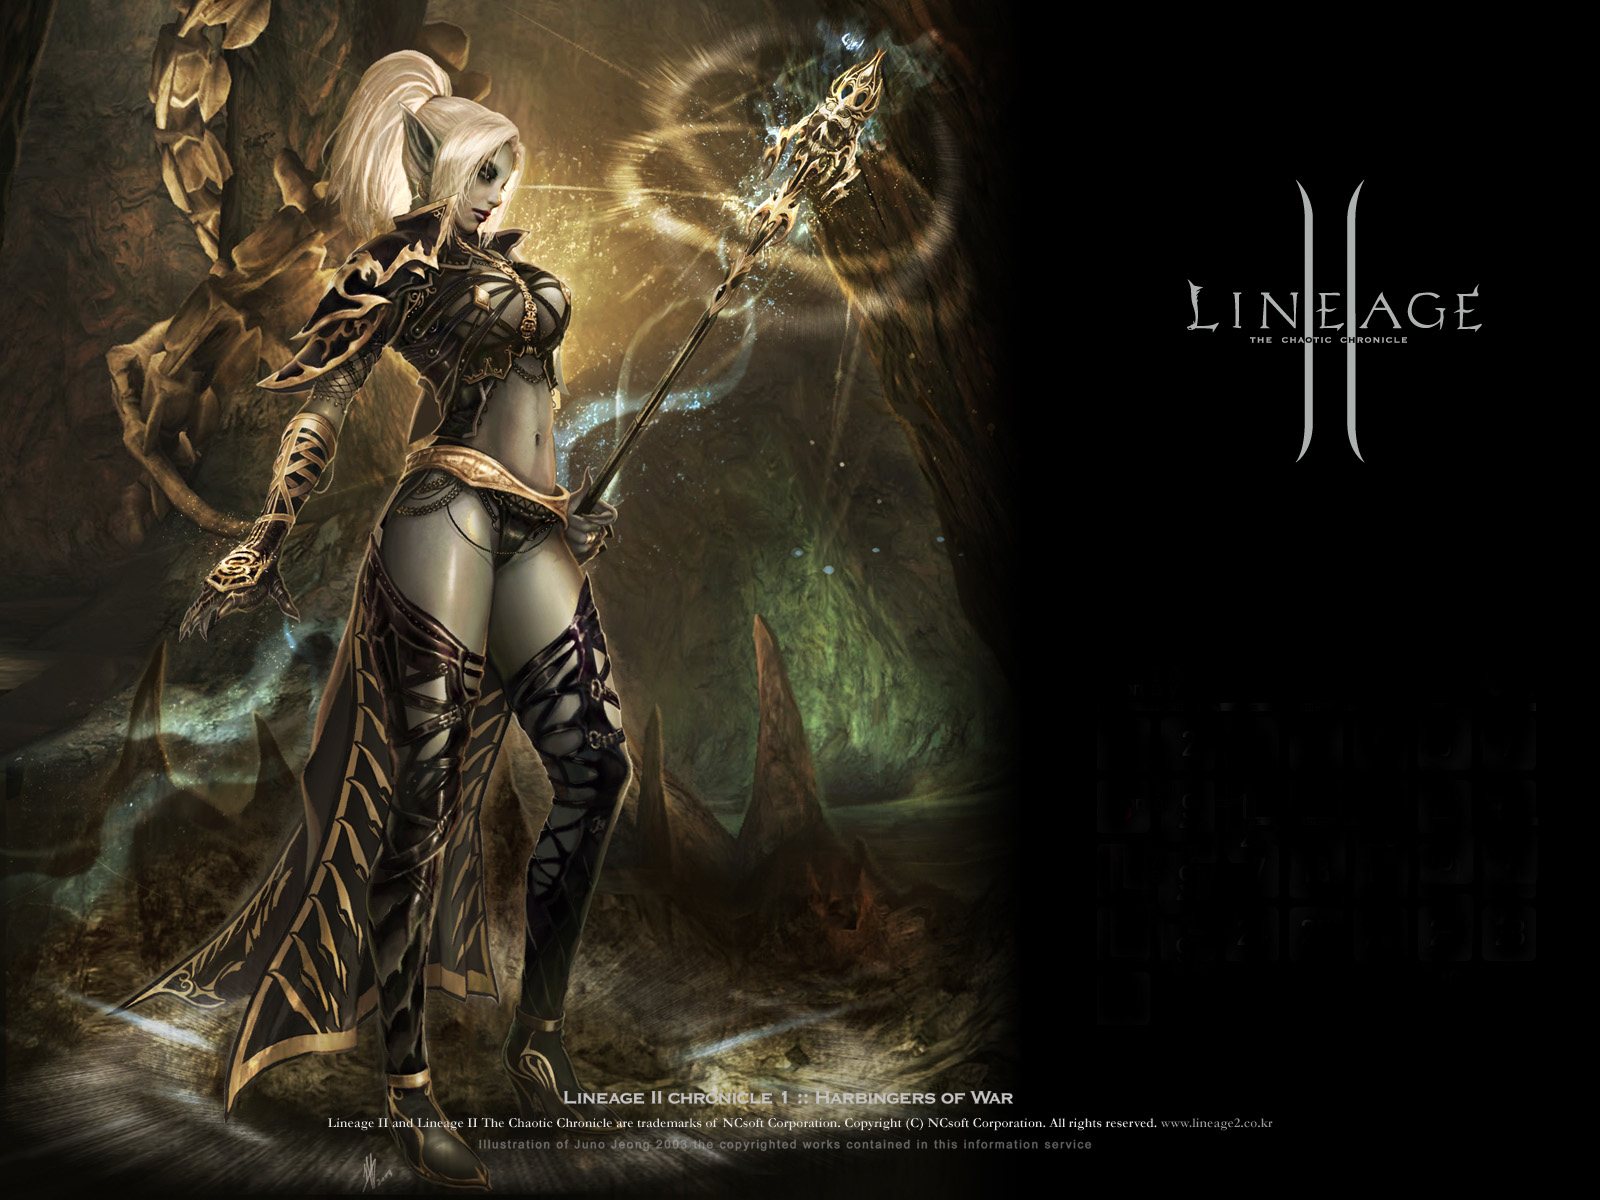 lineage 2 wallpaper,cg artwork,action adventure game,darkness,mythology,adventure game